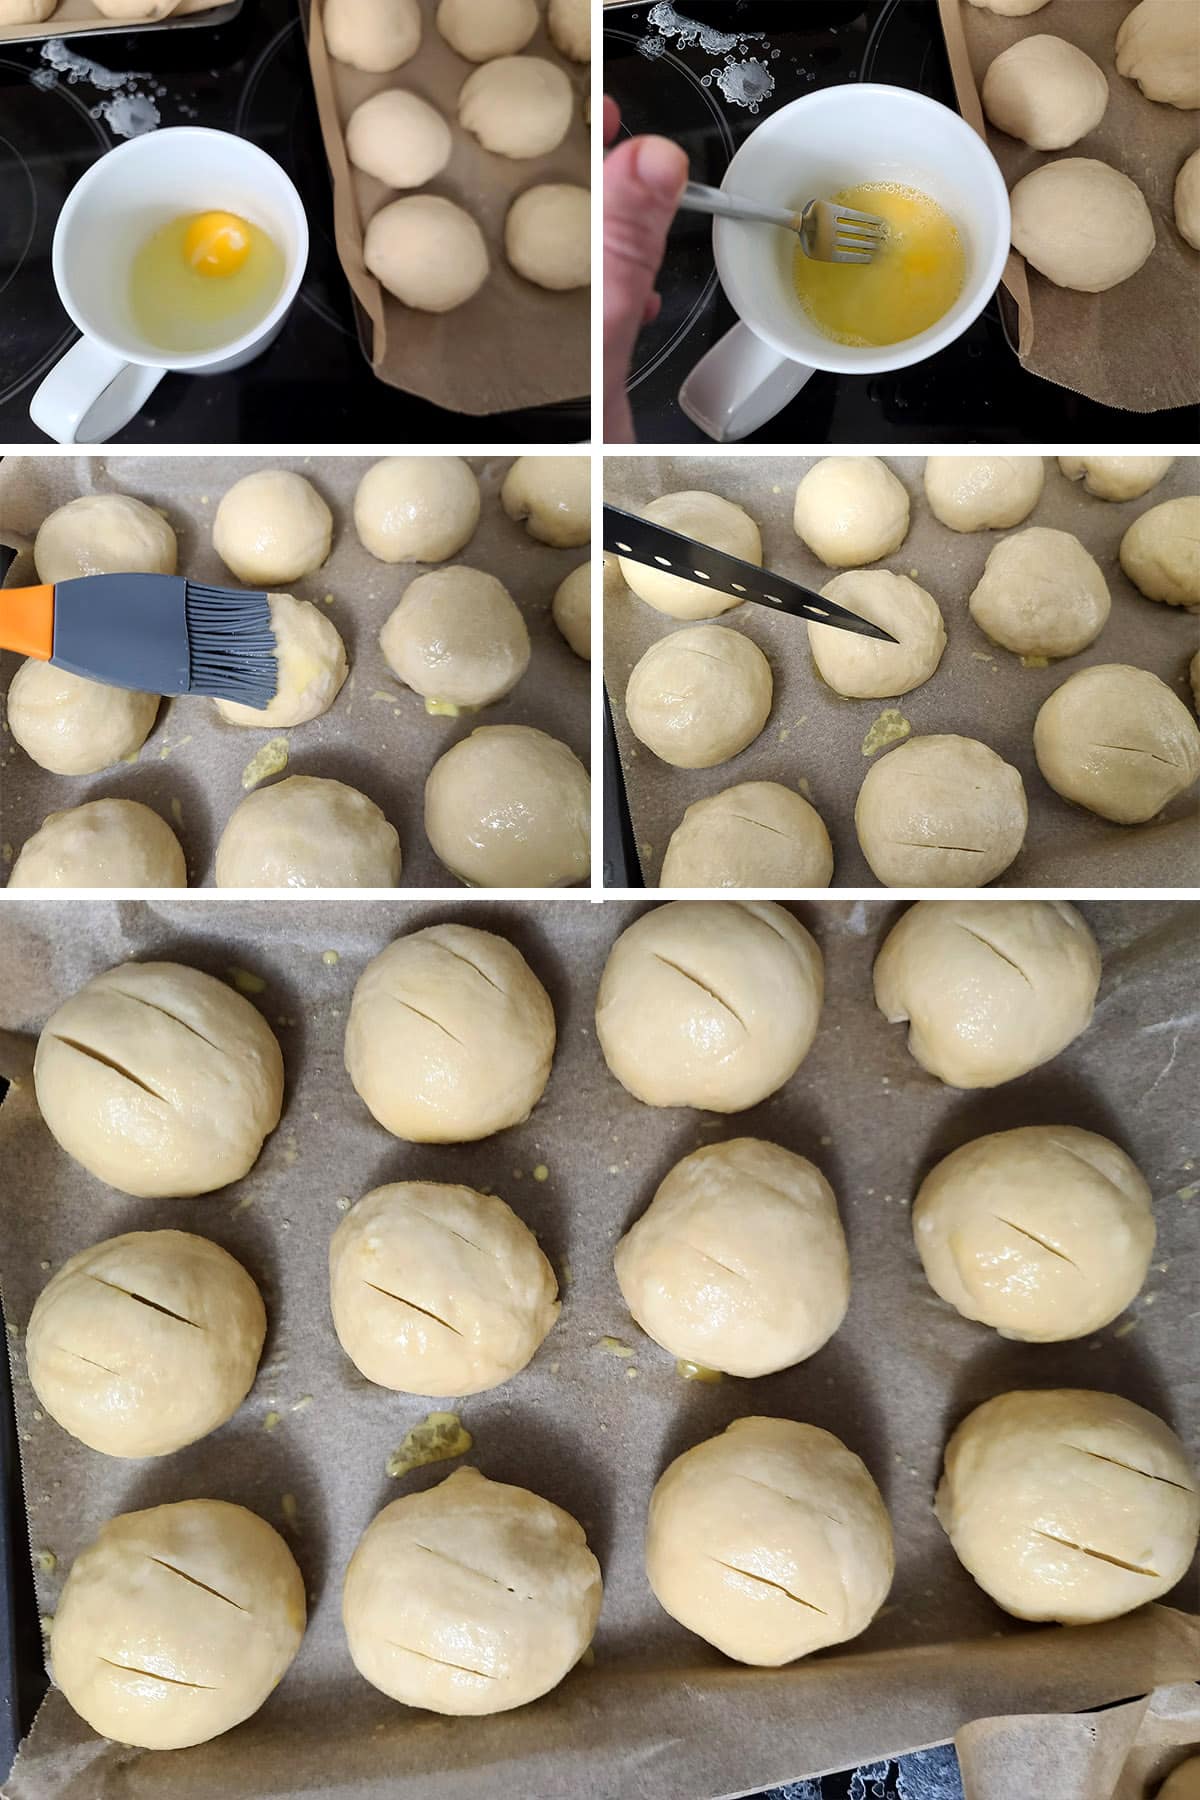 A 5 part image showing the egg wash being mixed and brushed over the boiled buns.